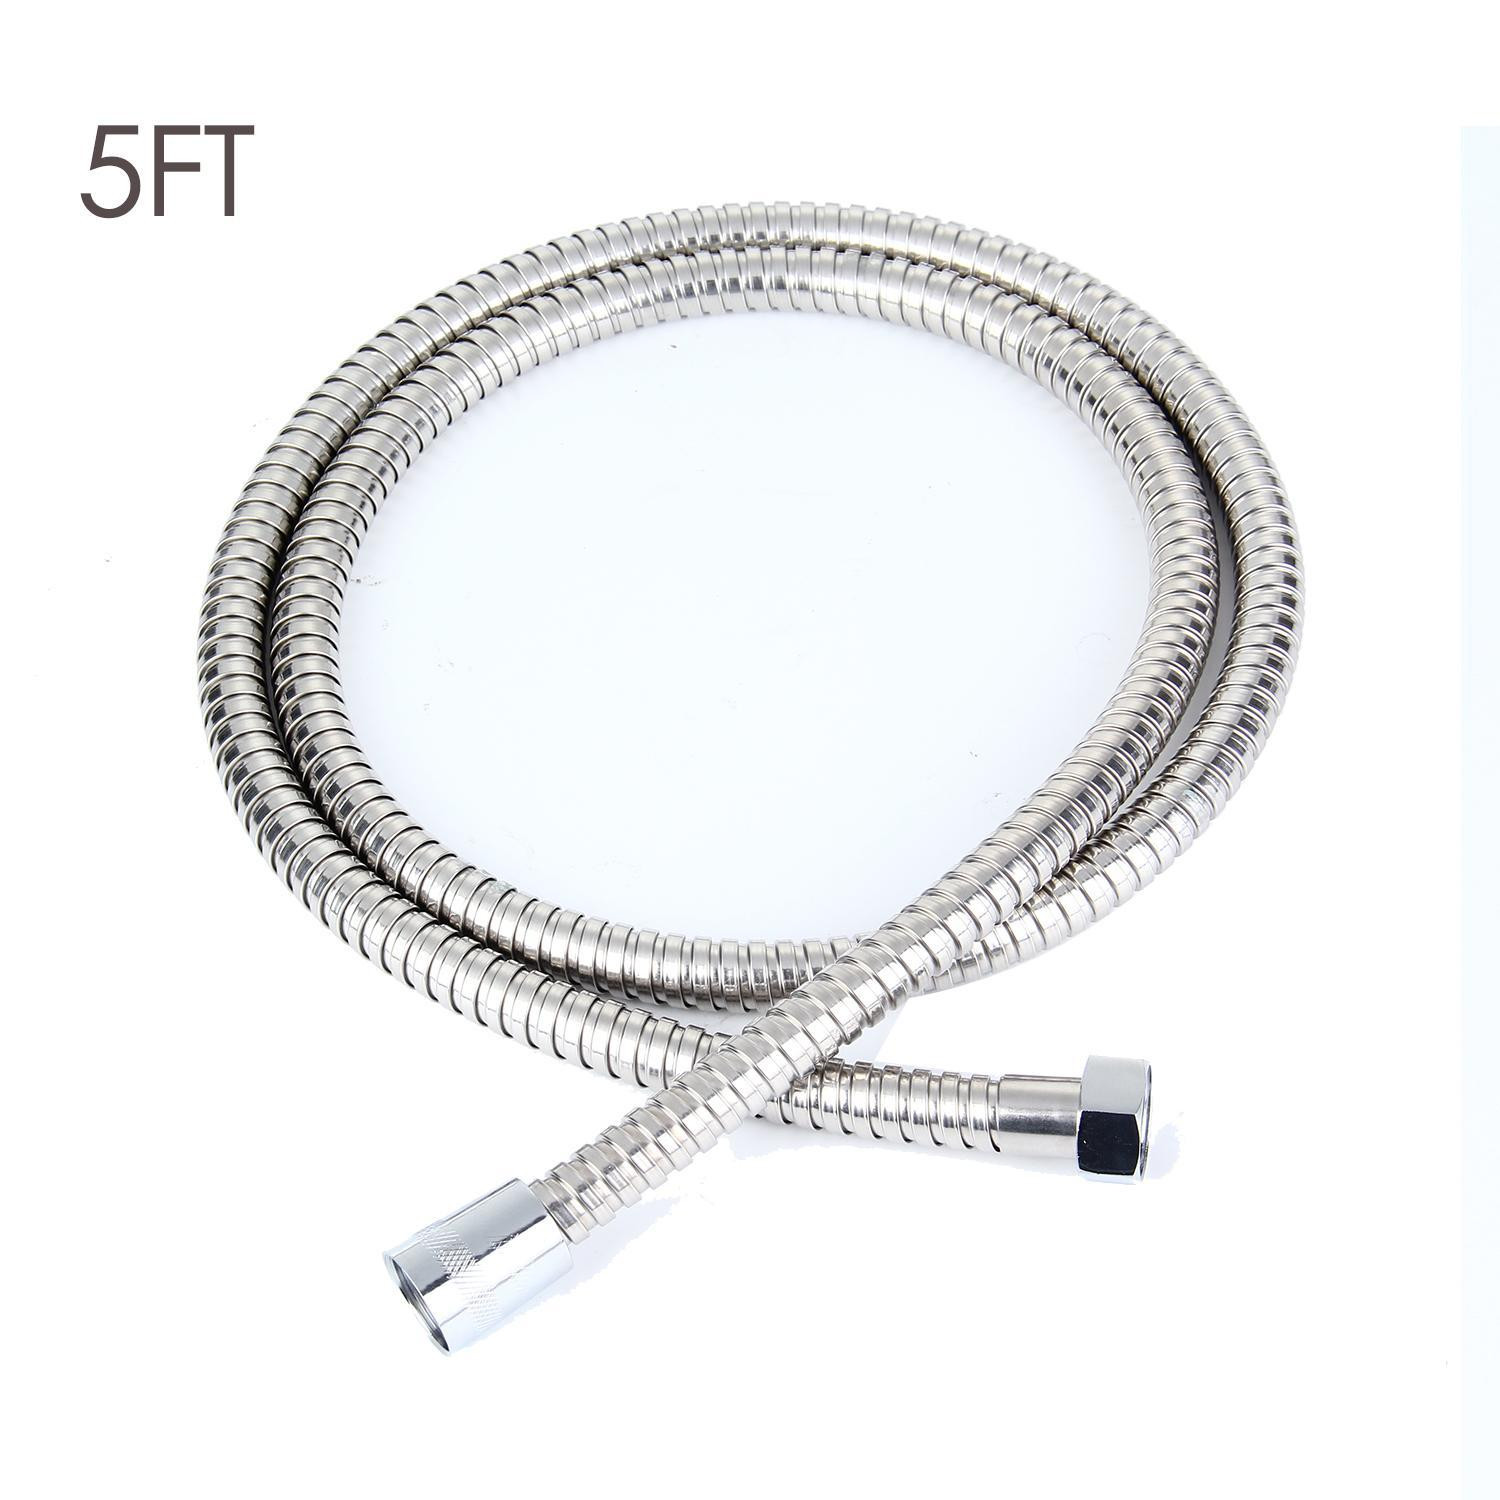 ss hardwood floors &amp;amp; supplies of gardena of home hoses pipes buy home hoses pipes at best price in inside niceeshop 5ft 60 inches 1 5 meter extra long flexible made of stainless steel bathroom